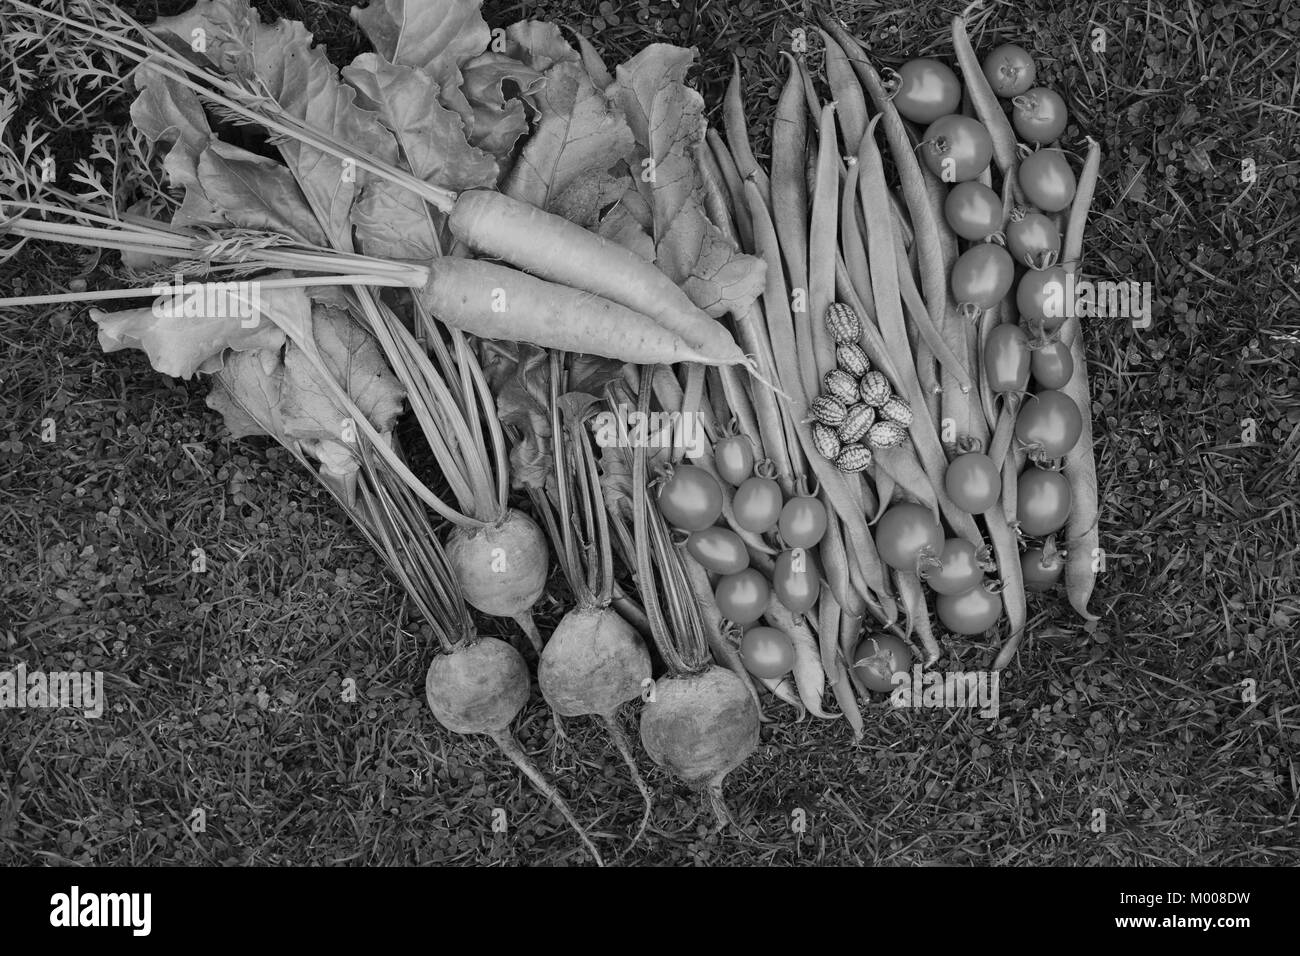 Selection of fresh produce from vegetable garden - carrots, runner beans, beets, cucamelons and ripe tomatoes - monochrome processing Stock Photo